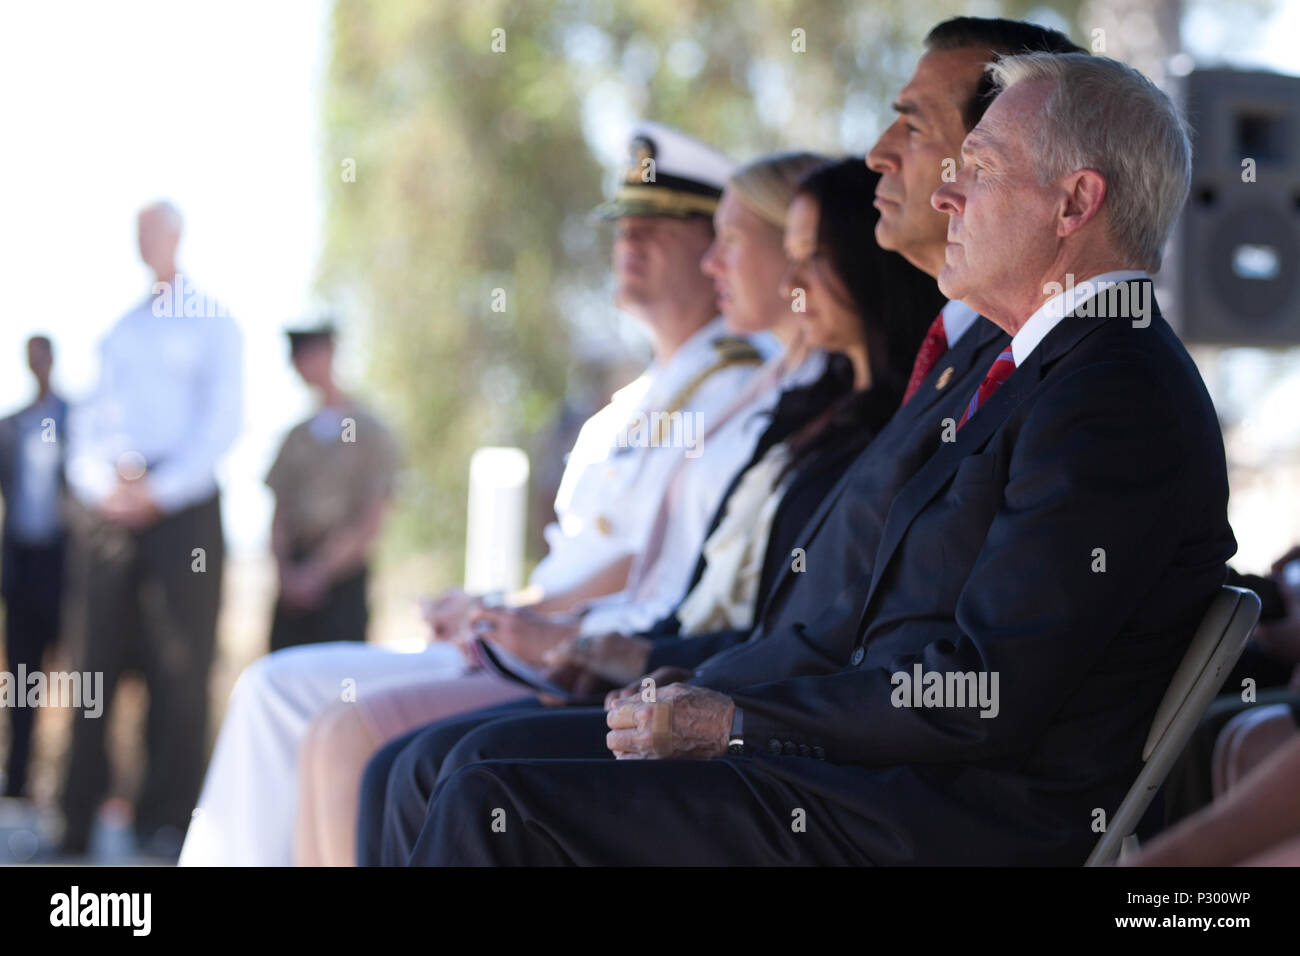 U.S. Secretary of the Navy Mr. Ray E. Mabus and Congressman Darrell Issa (R-CA) listen to Lt. Gen Lewis Craparotta, Commanding General, I Marine Expeditionary Force, make remarks at the ship naming ceremony for the USS John Basilone (DDG-122) on Camp Pendleton, Calif., August 16, 2016. (U.S. Marine Corps photo by Cpl. Tyler S. Dietrich) Stock Photo